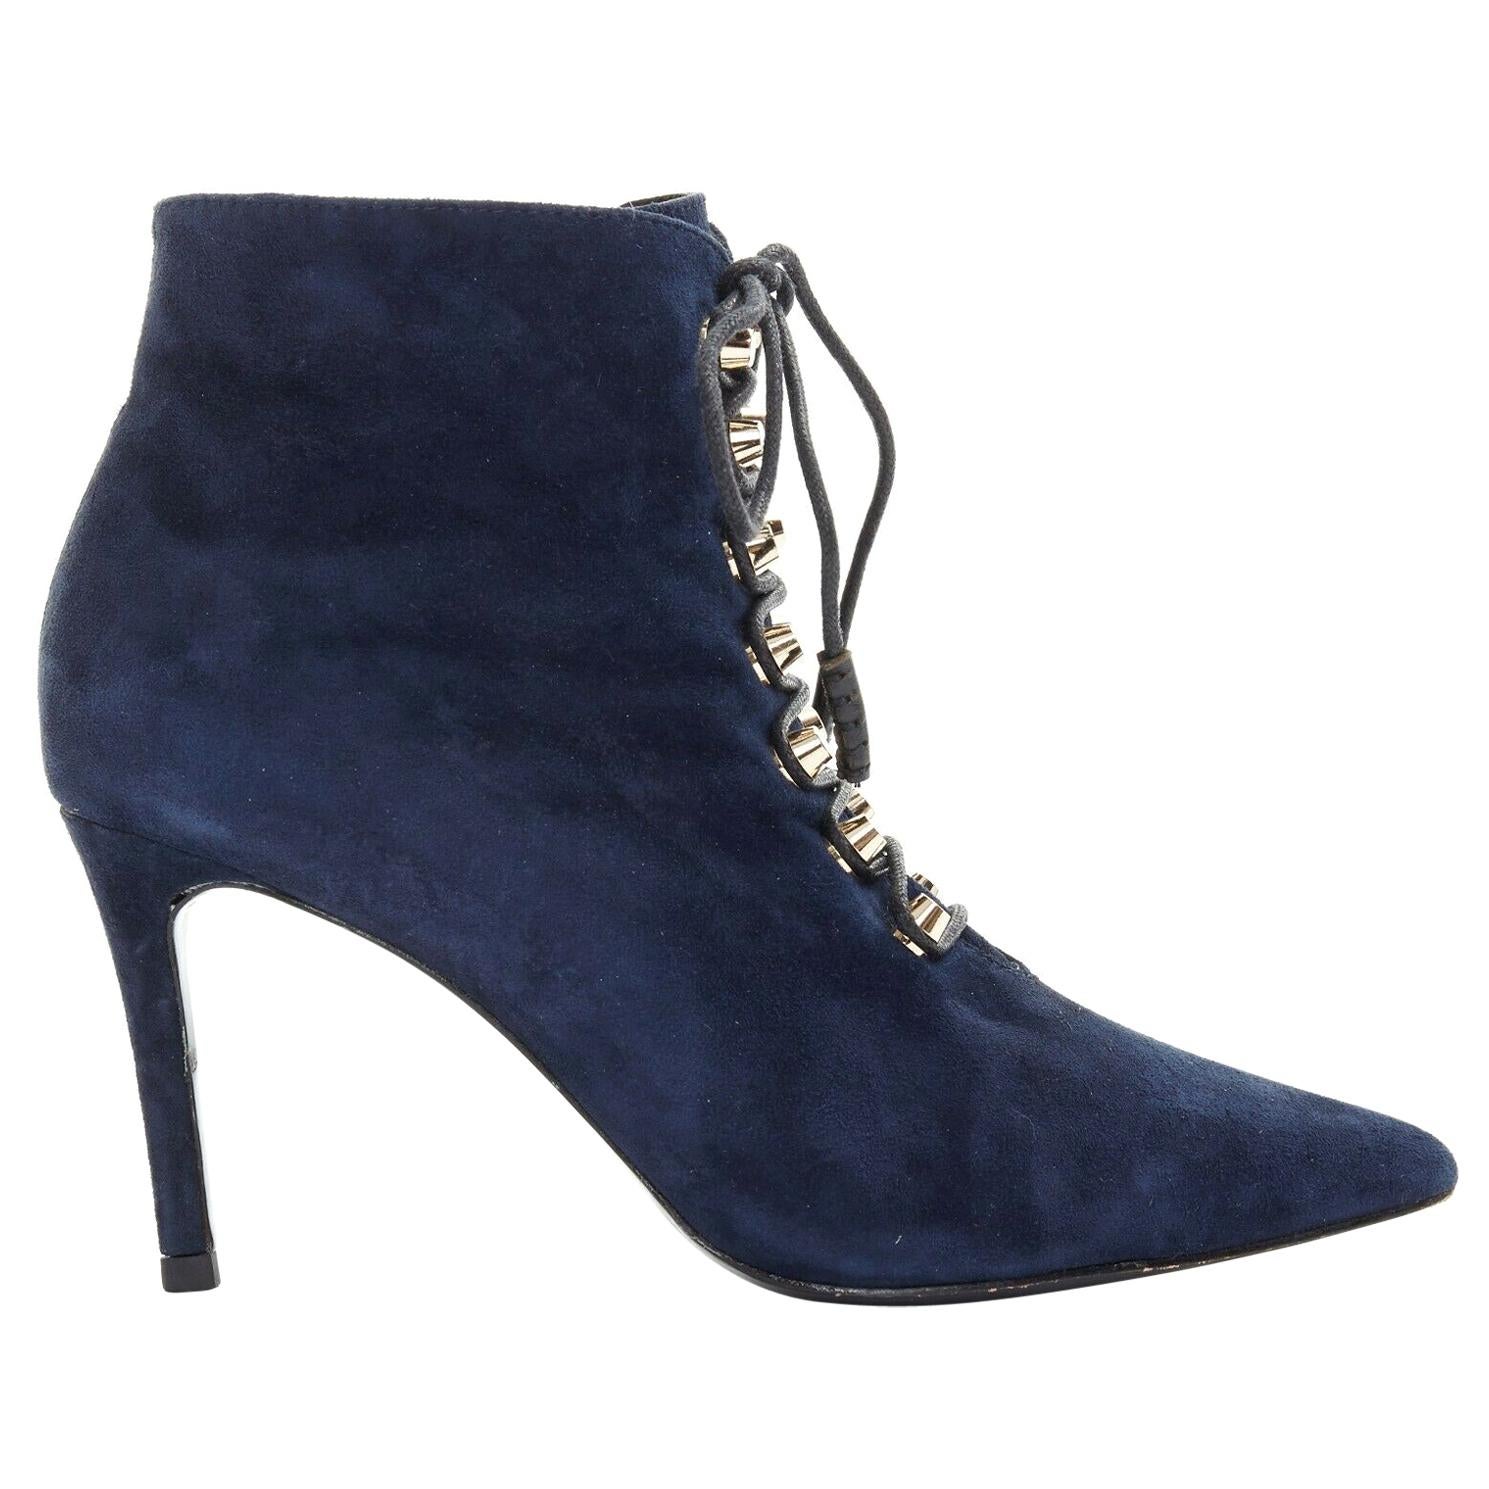 BALENCIAGA navy blue suede gold-tone stud lace up point toe ankle bootie EU37